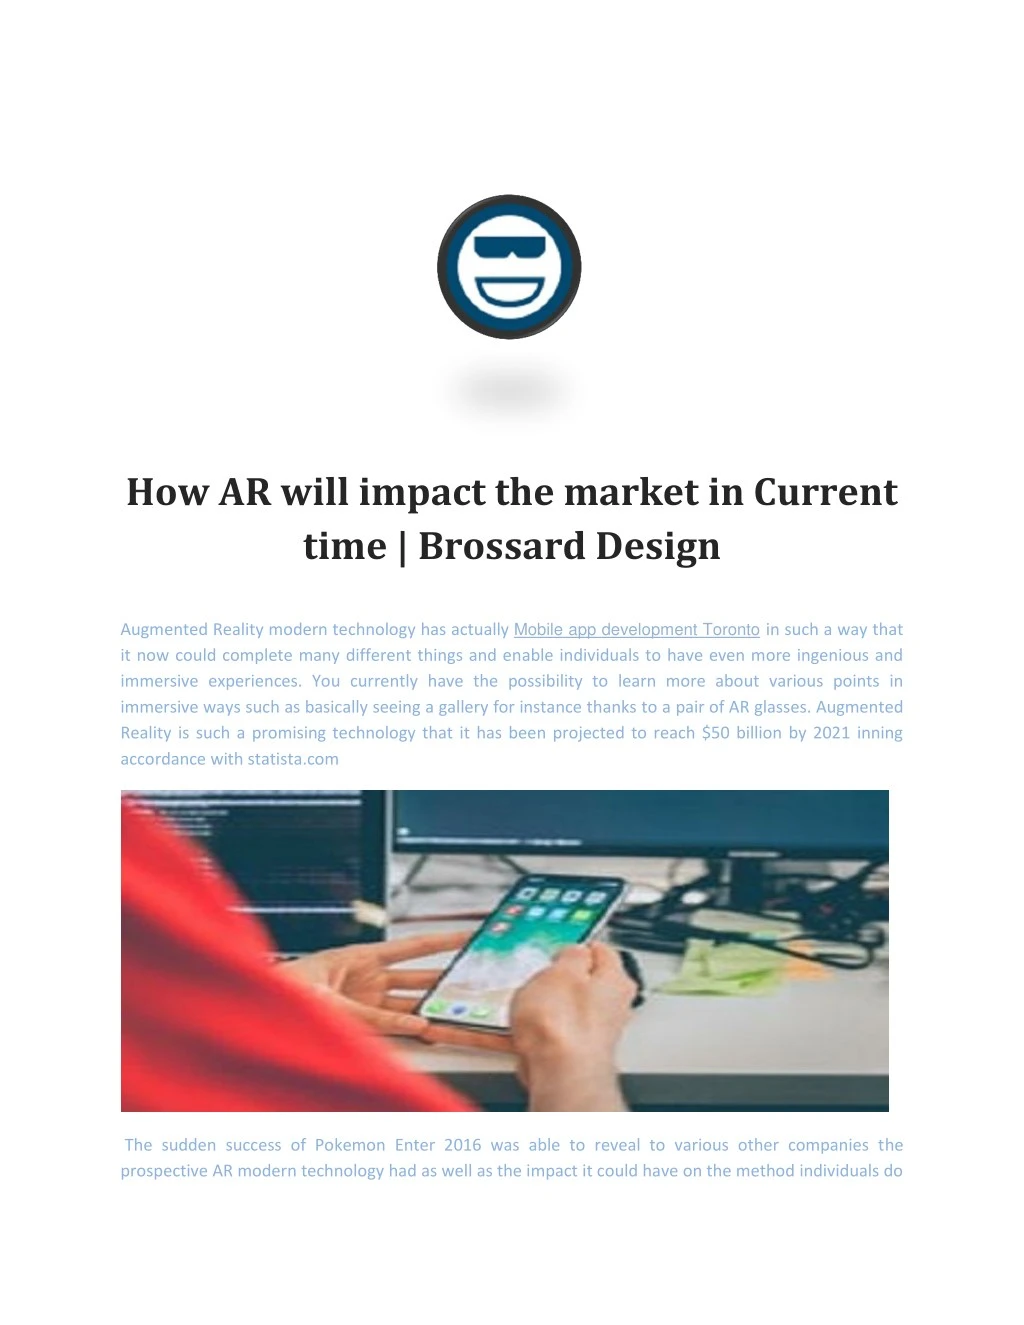 how ar will impact the market in current time